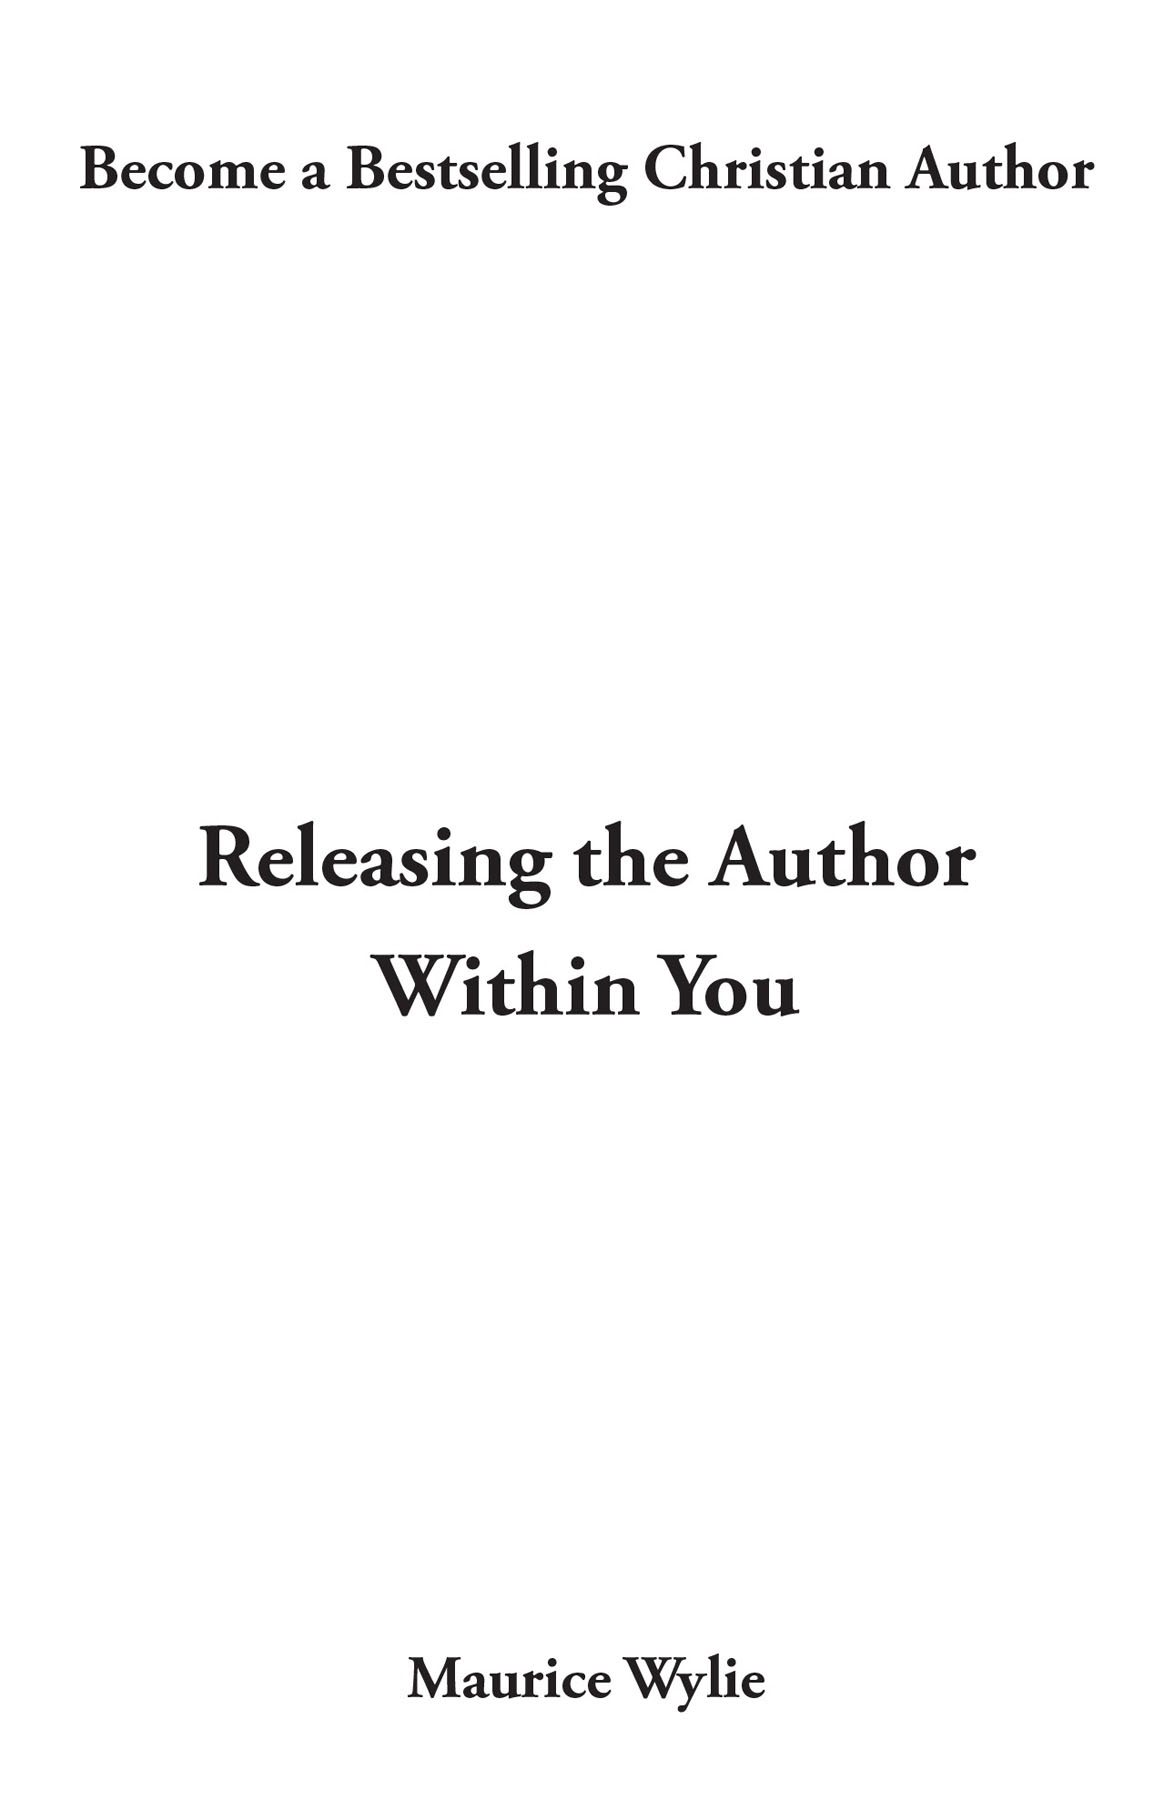 RELEASING THE AUTHOR WITHIN YOU Copyright 2020 by Maurice Wylie ISBN - photo 2